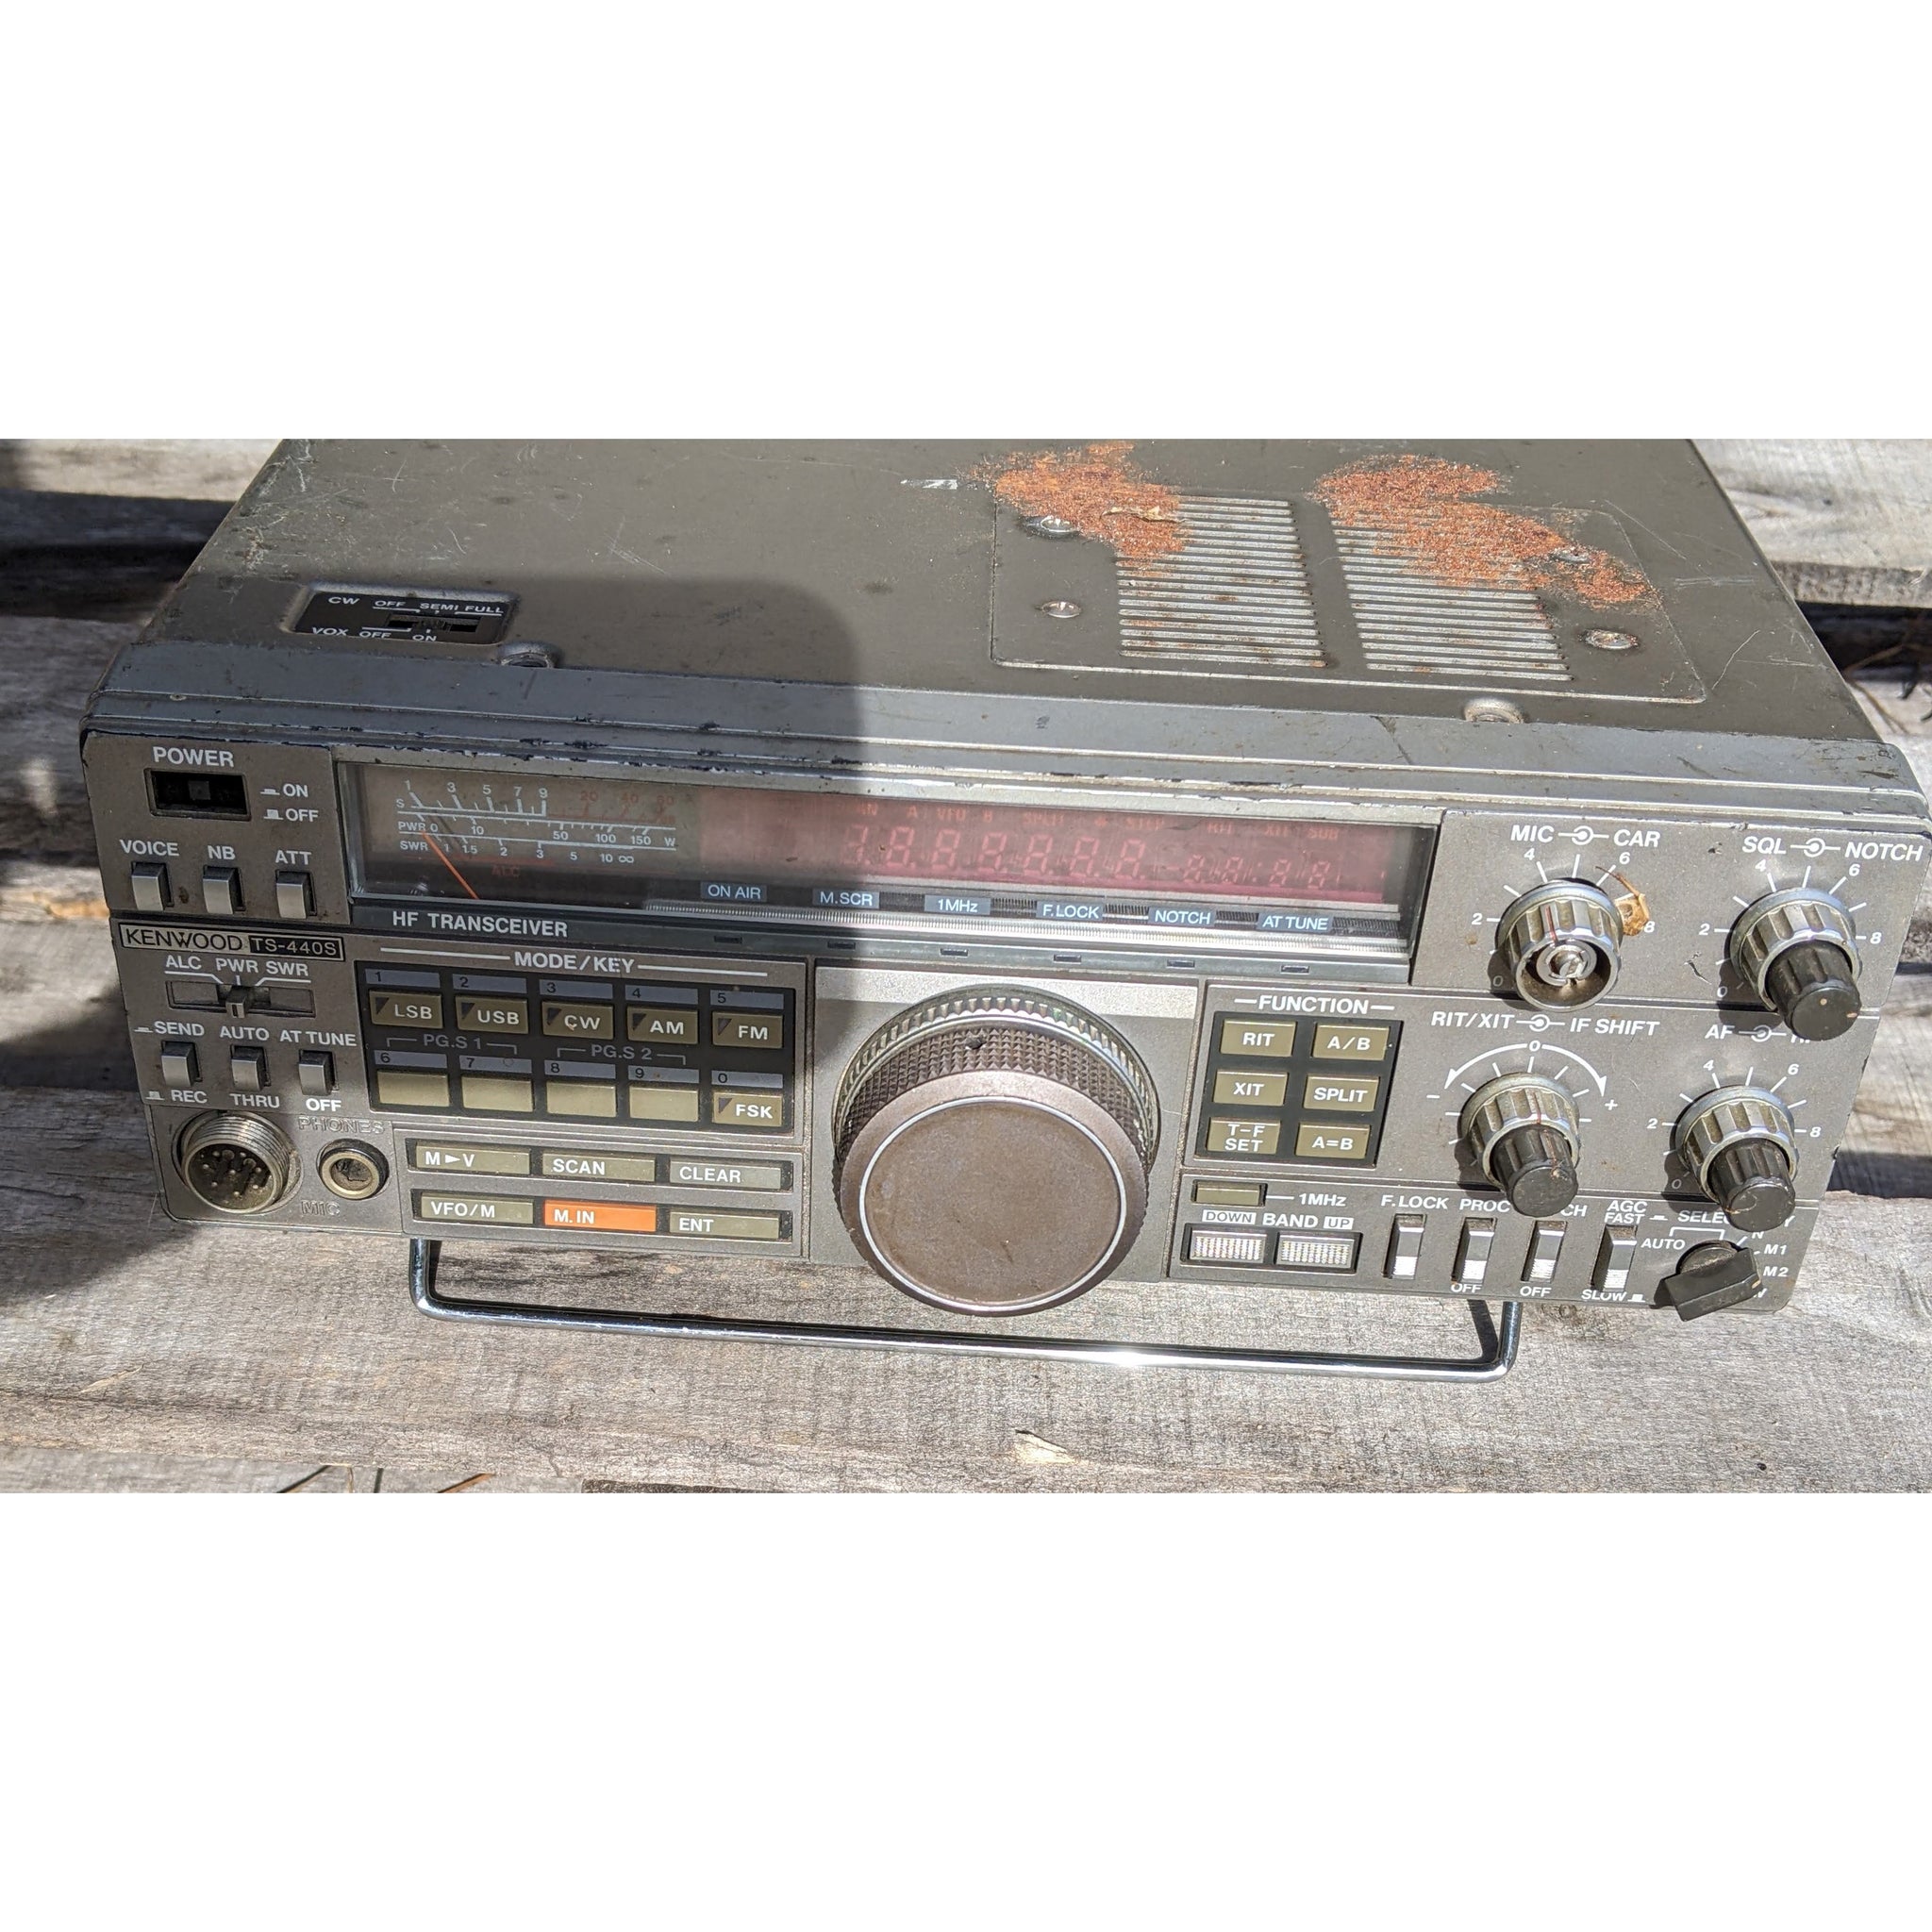 Kenwood TS-440S Radio Transceiver, Parts Only